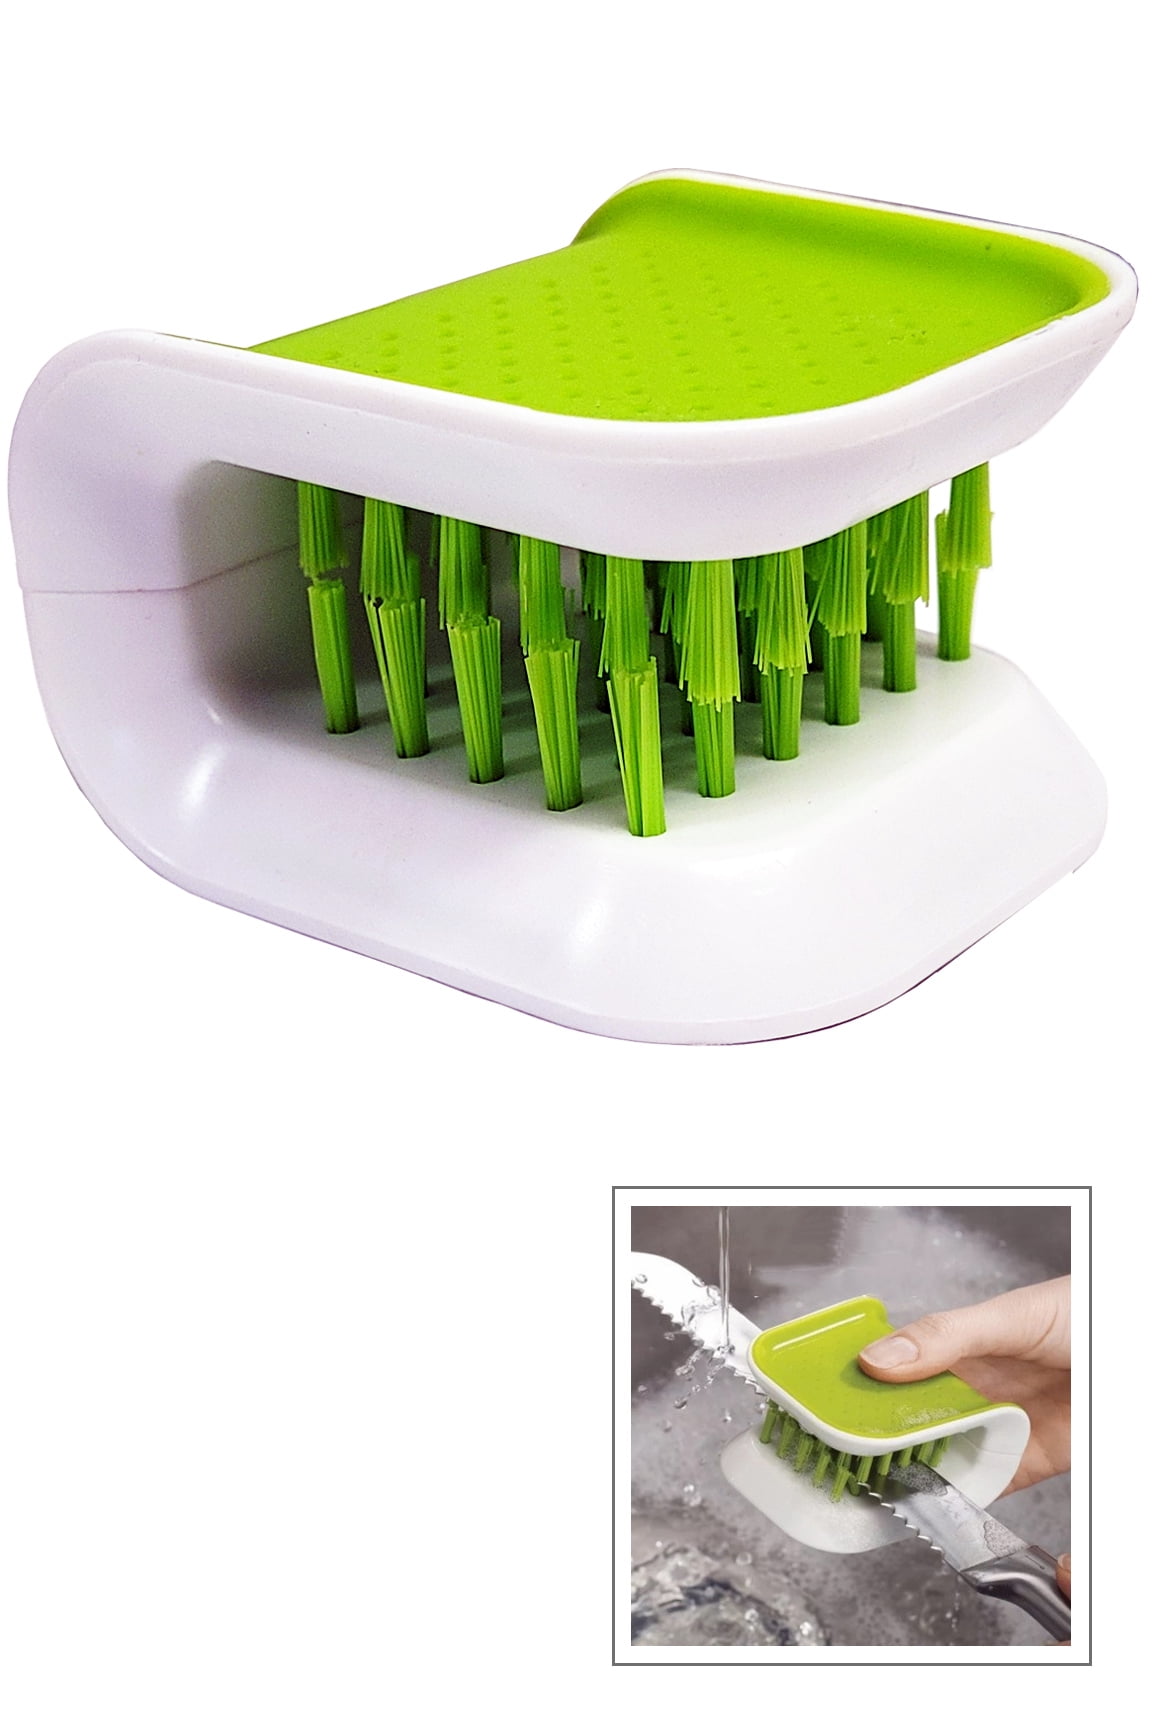 Knife & Cutlery Portable Cleaning Blade Brush